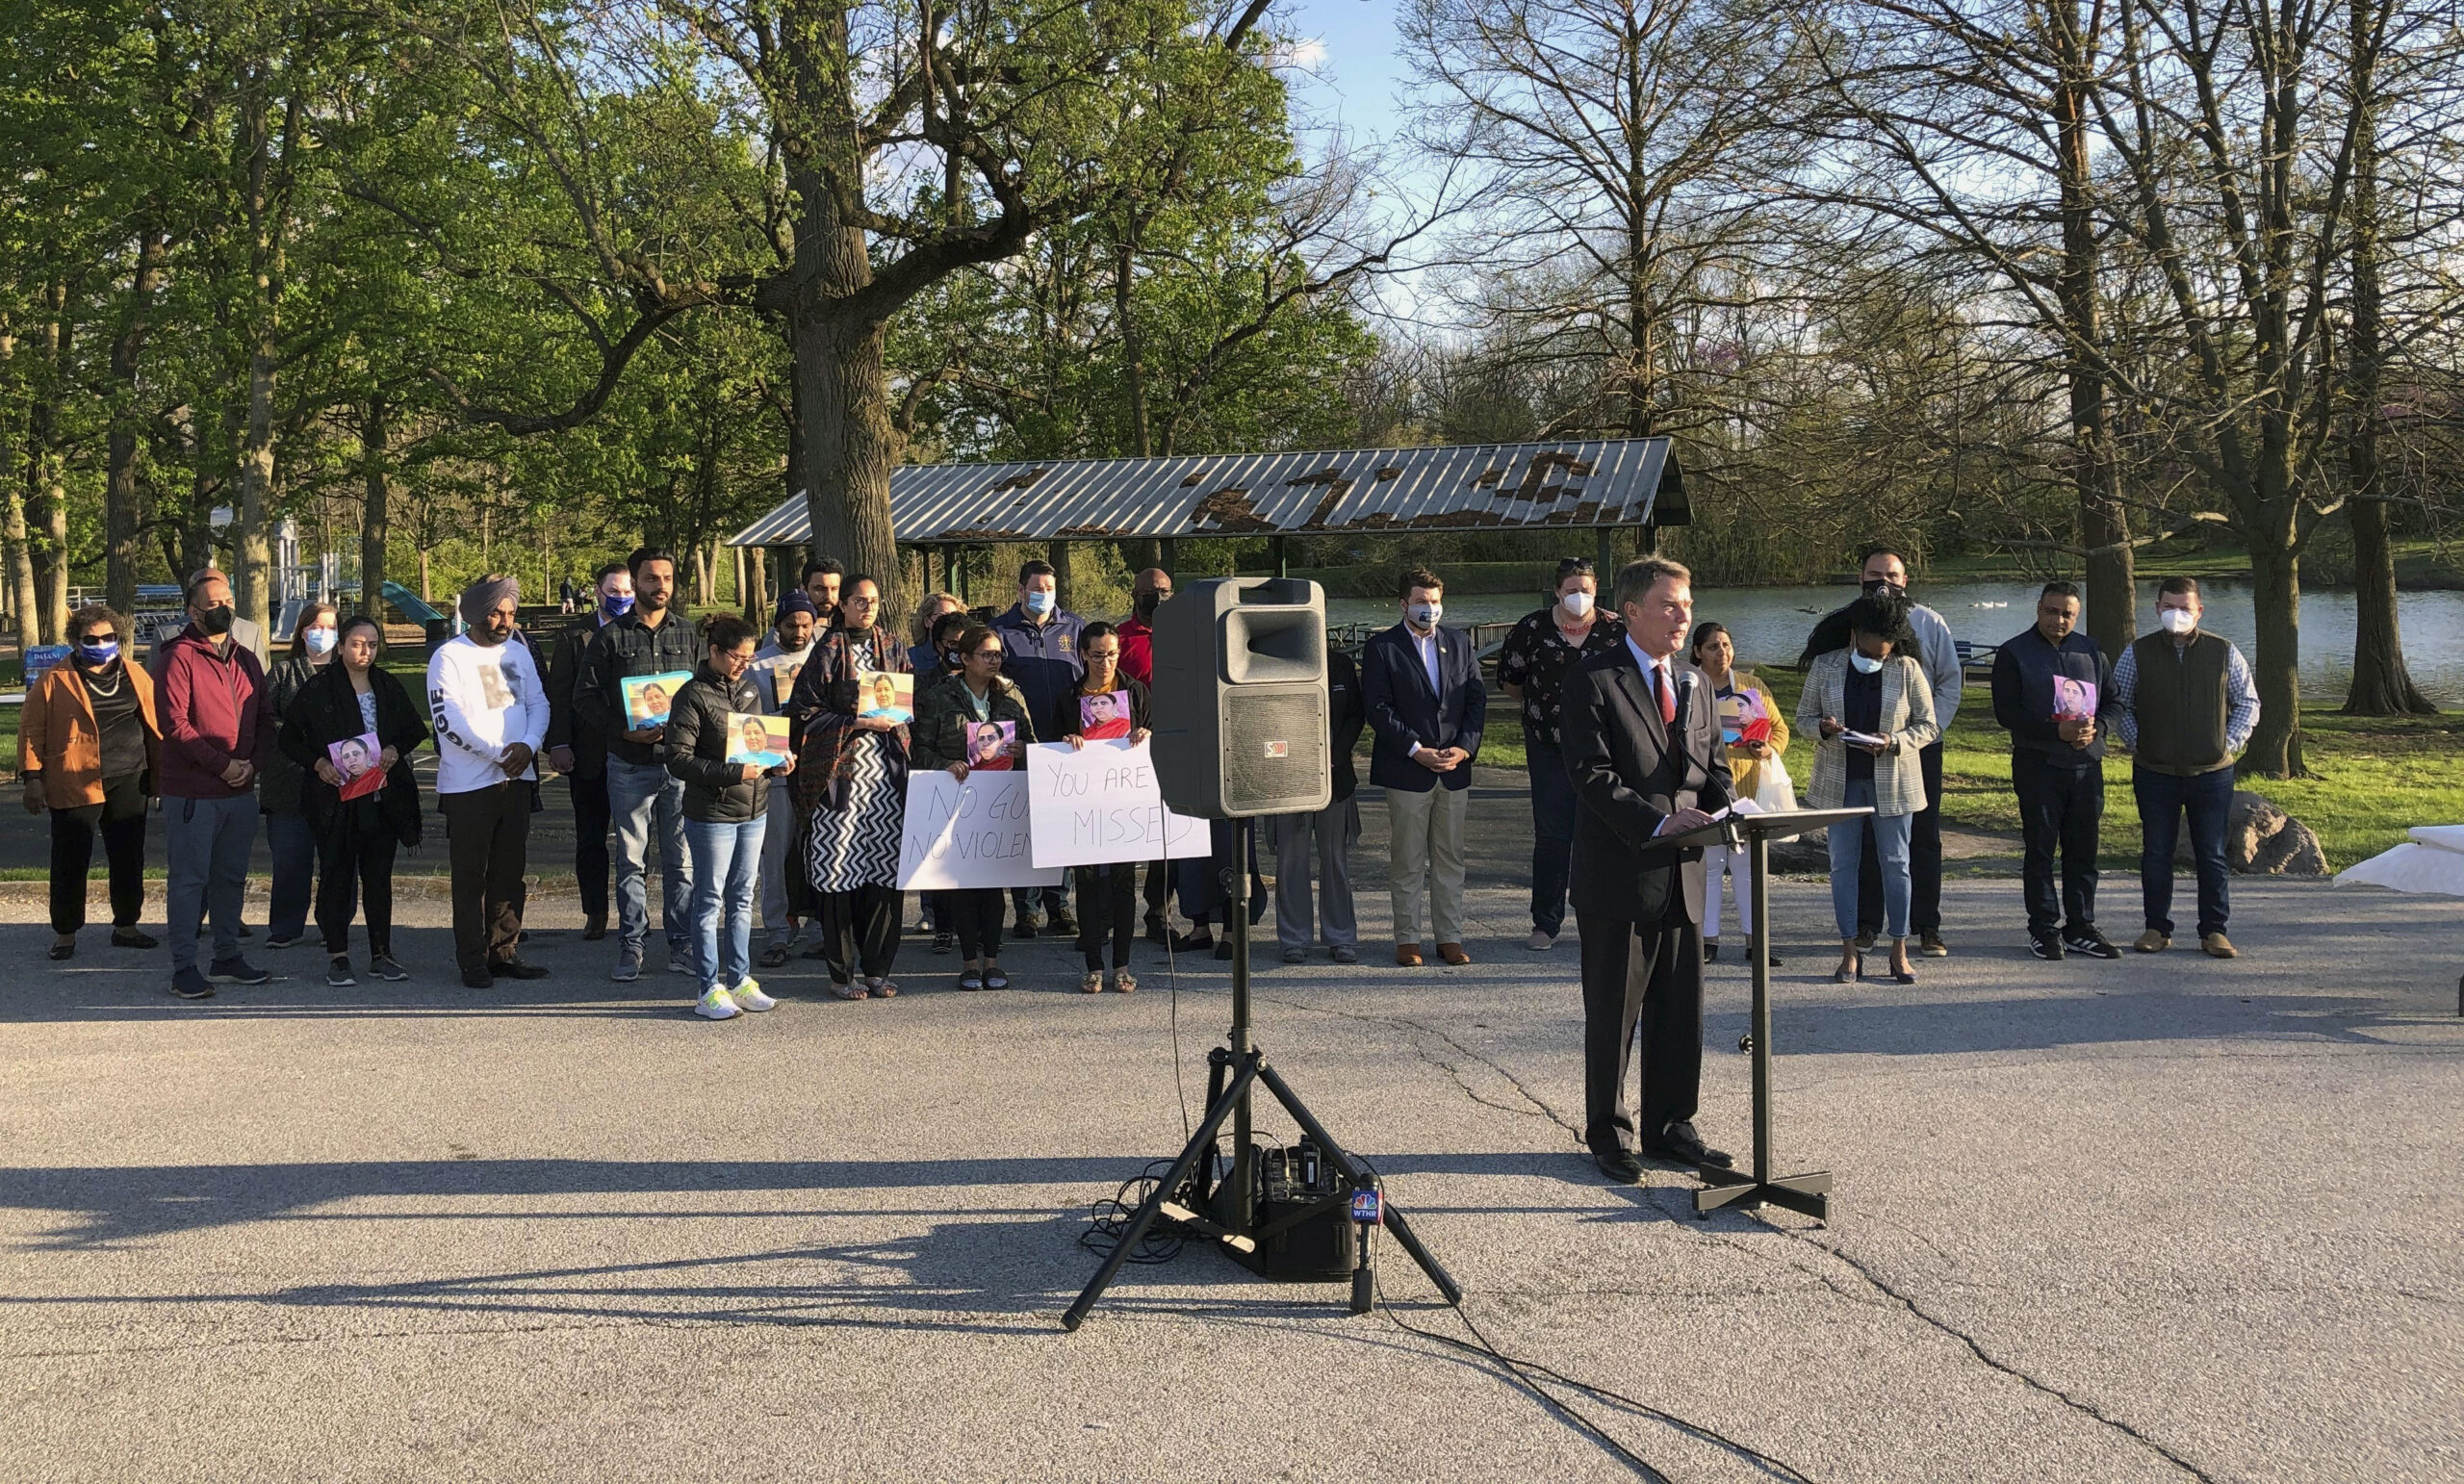 Indianapolis Mayor Joe Hogarth speaks at a vigil Saturday, April 17, 2021 at Krannert Park on Indianapolis’ west side to memorialize the eight people killed in the mass shooting at a FedEx warehouse. Behind him, members of the Sikh community, whose loved ones were killed, hold signs demanding policymakers make gun law reforms in the wake of the shooting. (AP Photo/Casey Smith)